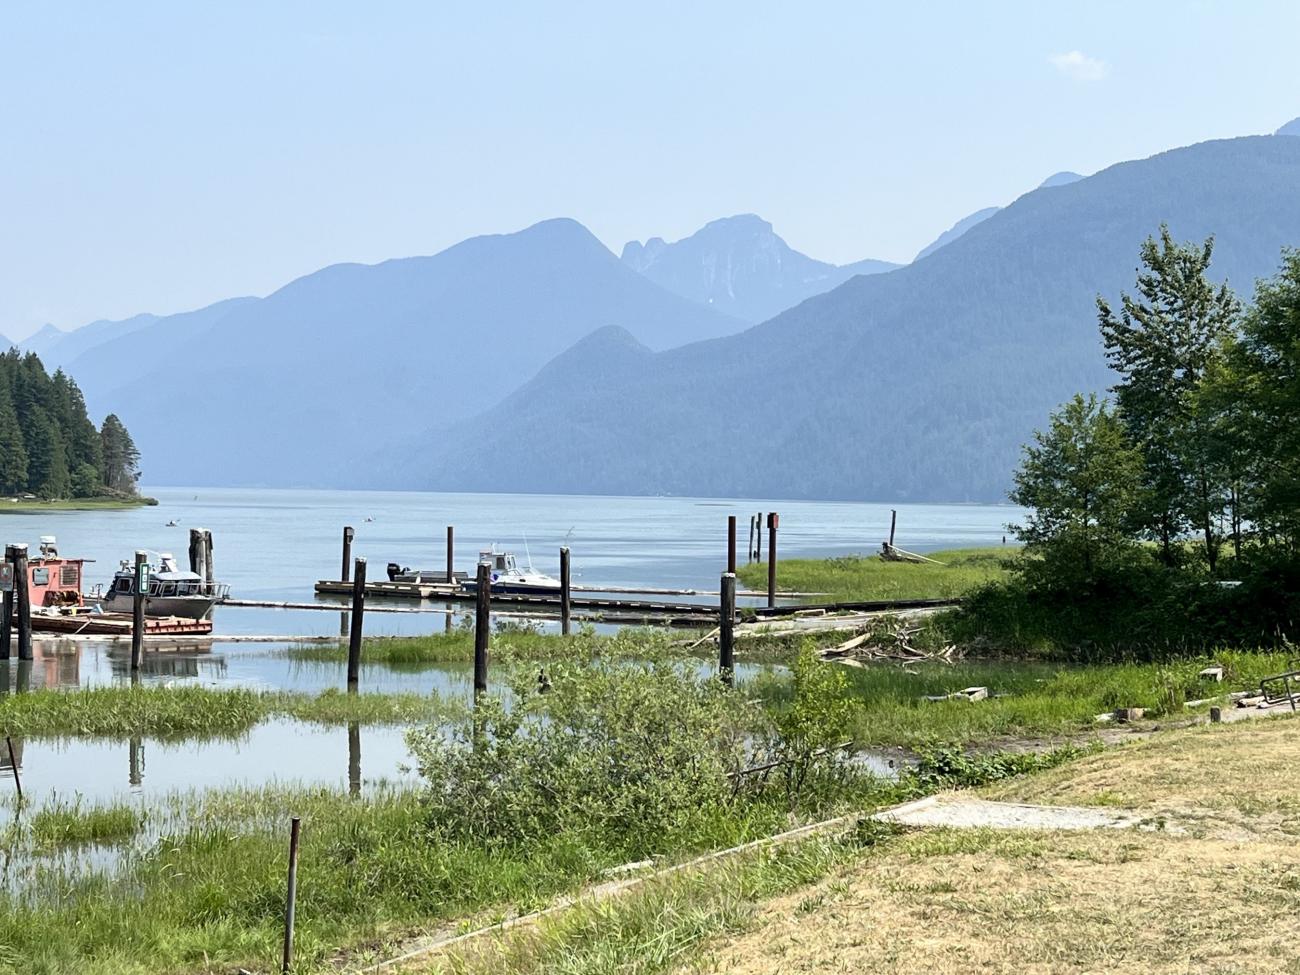 Looking at the south end of Pitt lake from the boat launch area